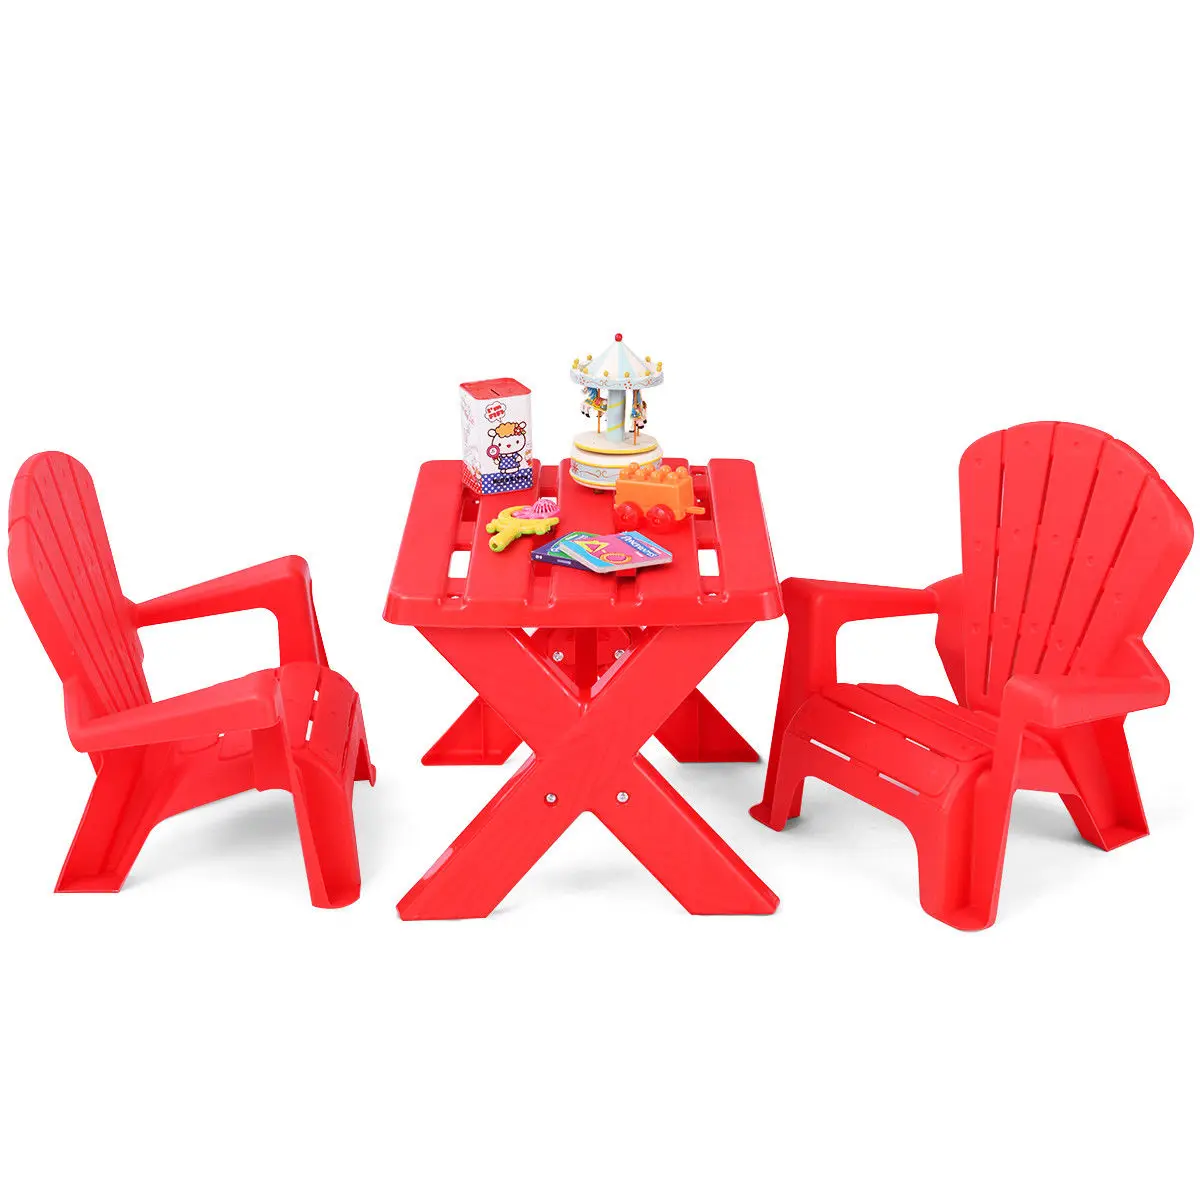 Plastic Children Kids Table &amp; Chair Set 3-Piece Play Furniture In/Outdoo... - $131.38